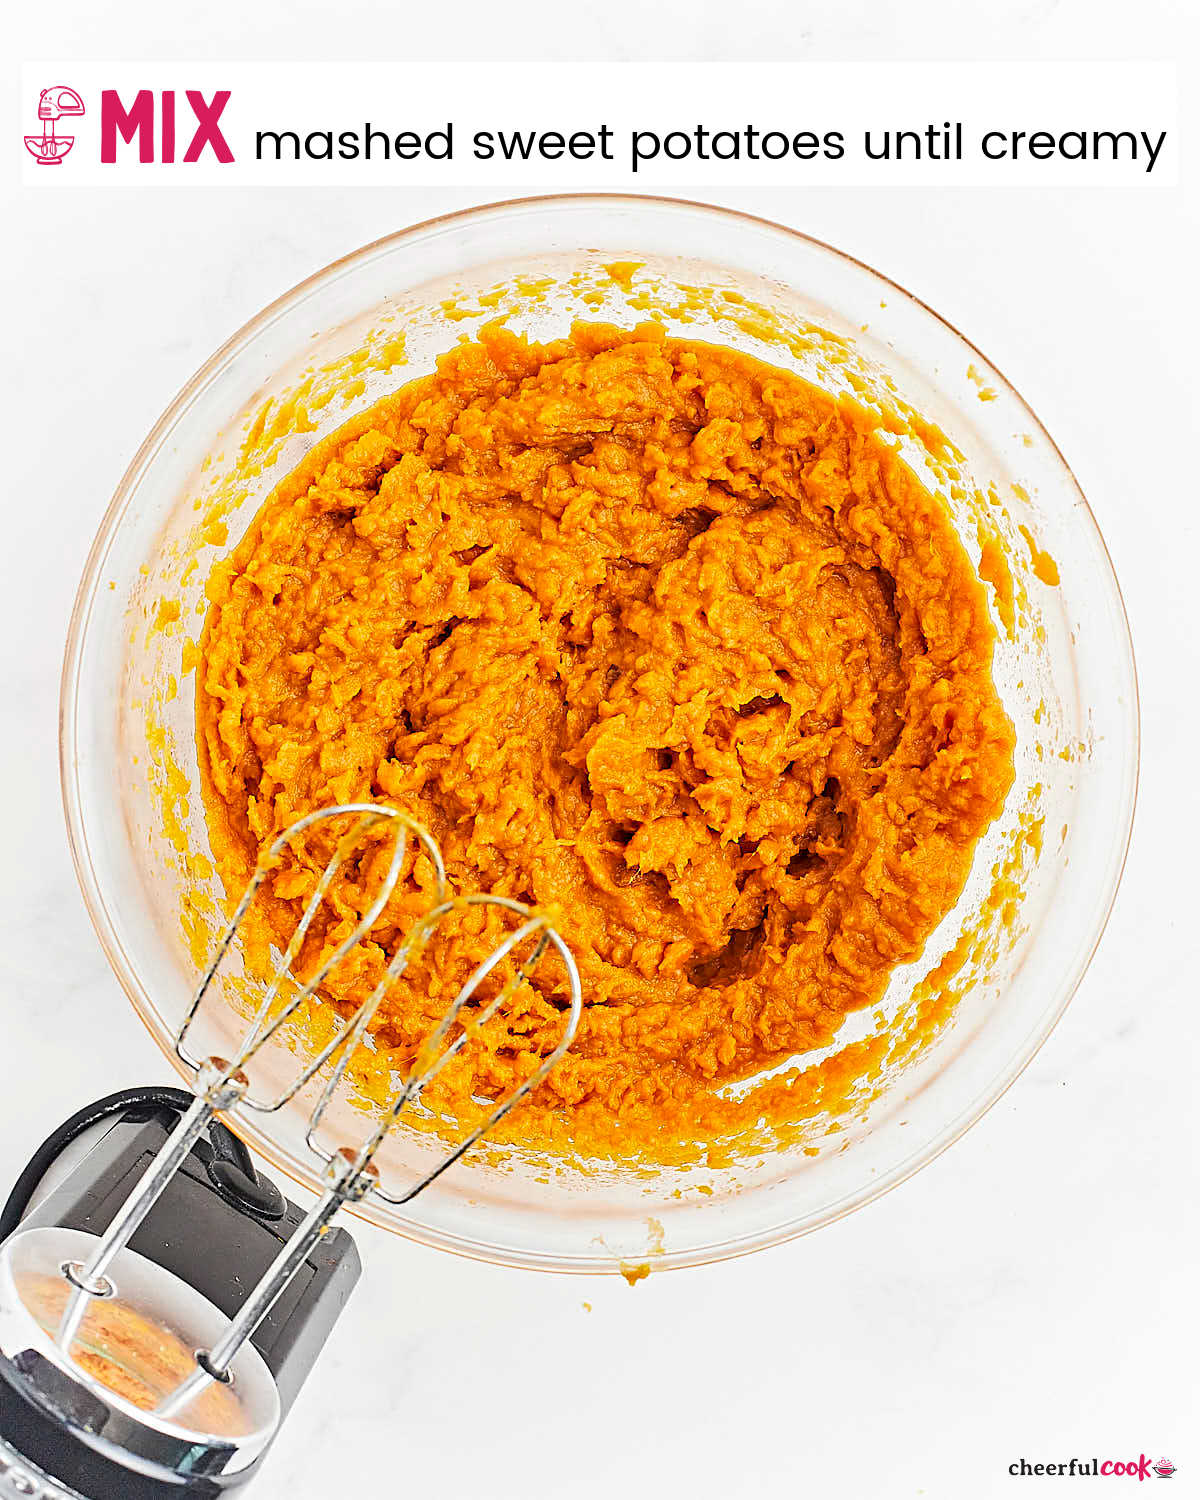 Process Step: Use a mixer to blend the mashed sweet potatoes.